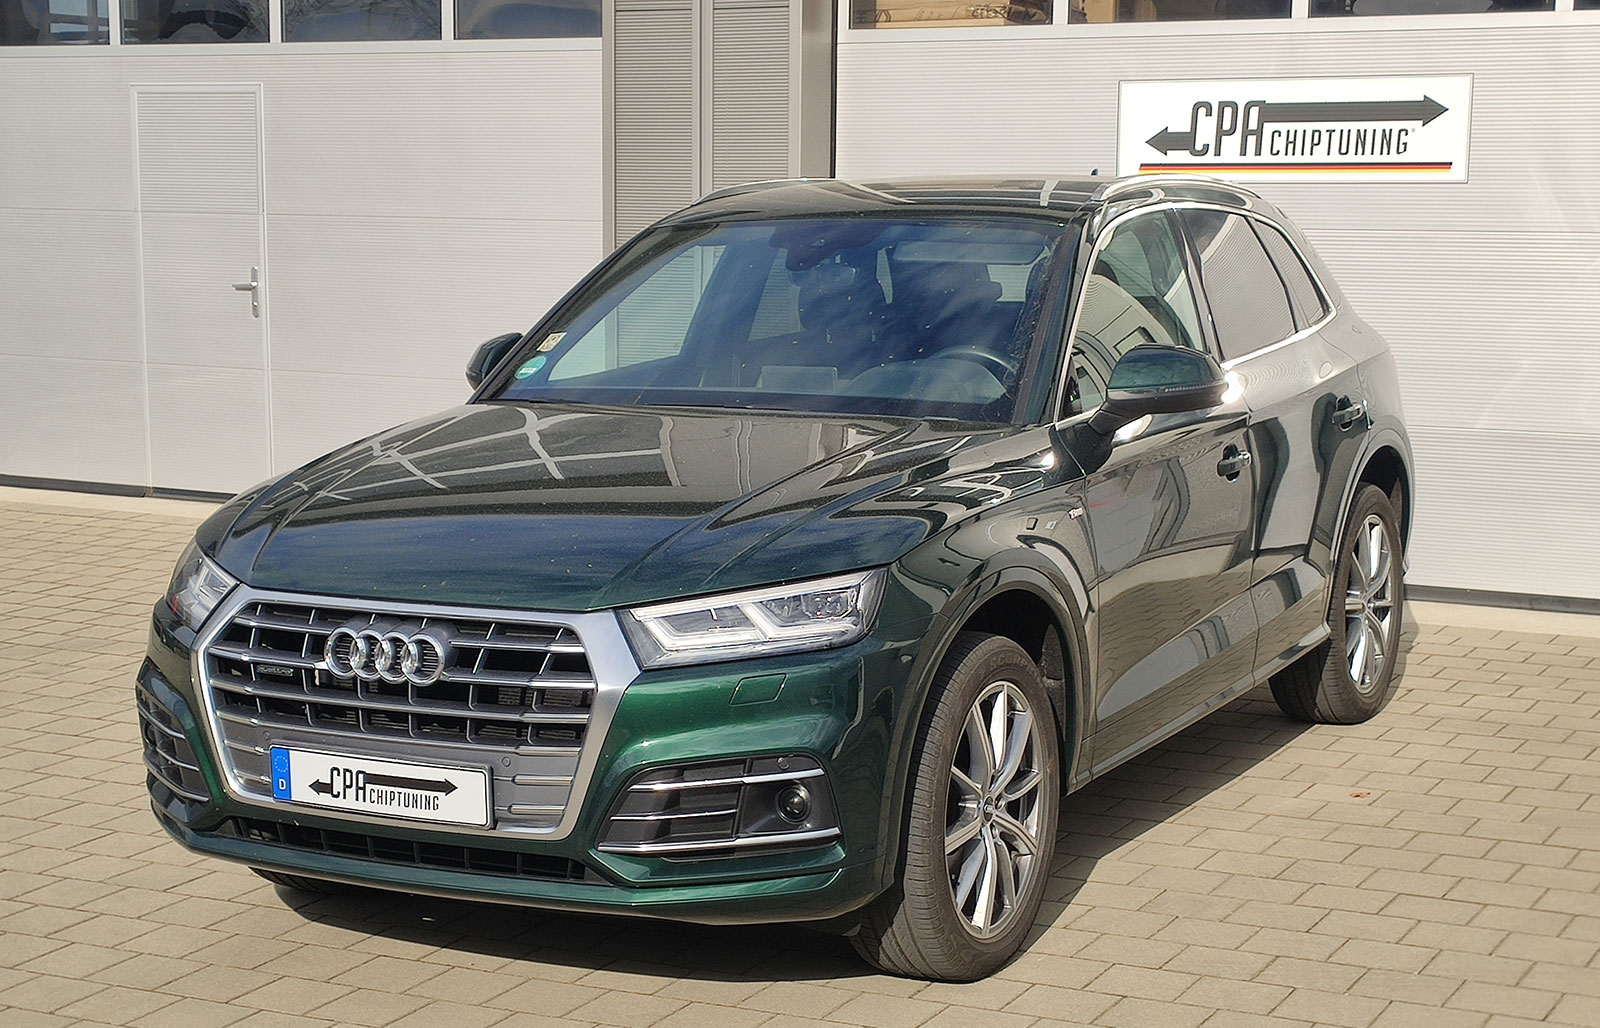 More Power, More Driving Fun: Chiptuning for the Audi Q5 (FY) 35 TDI